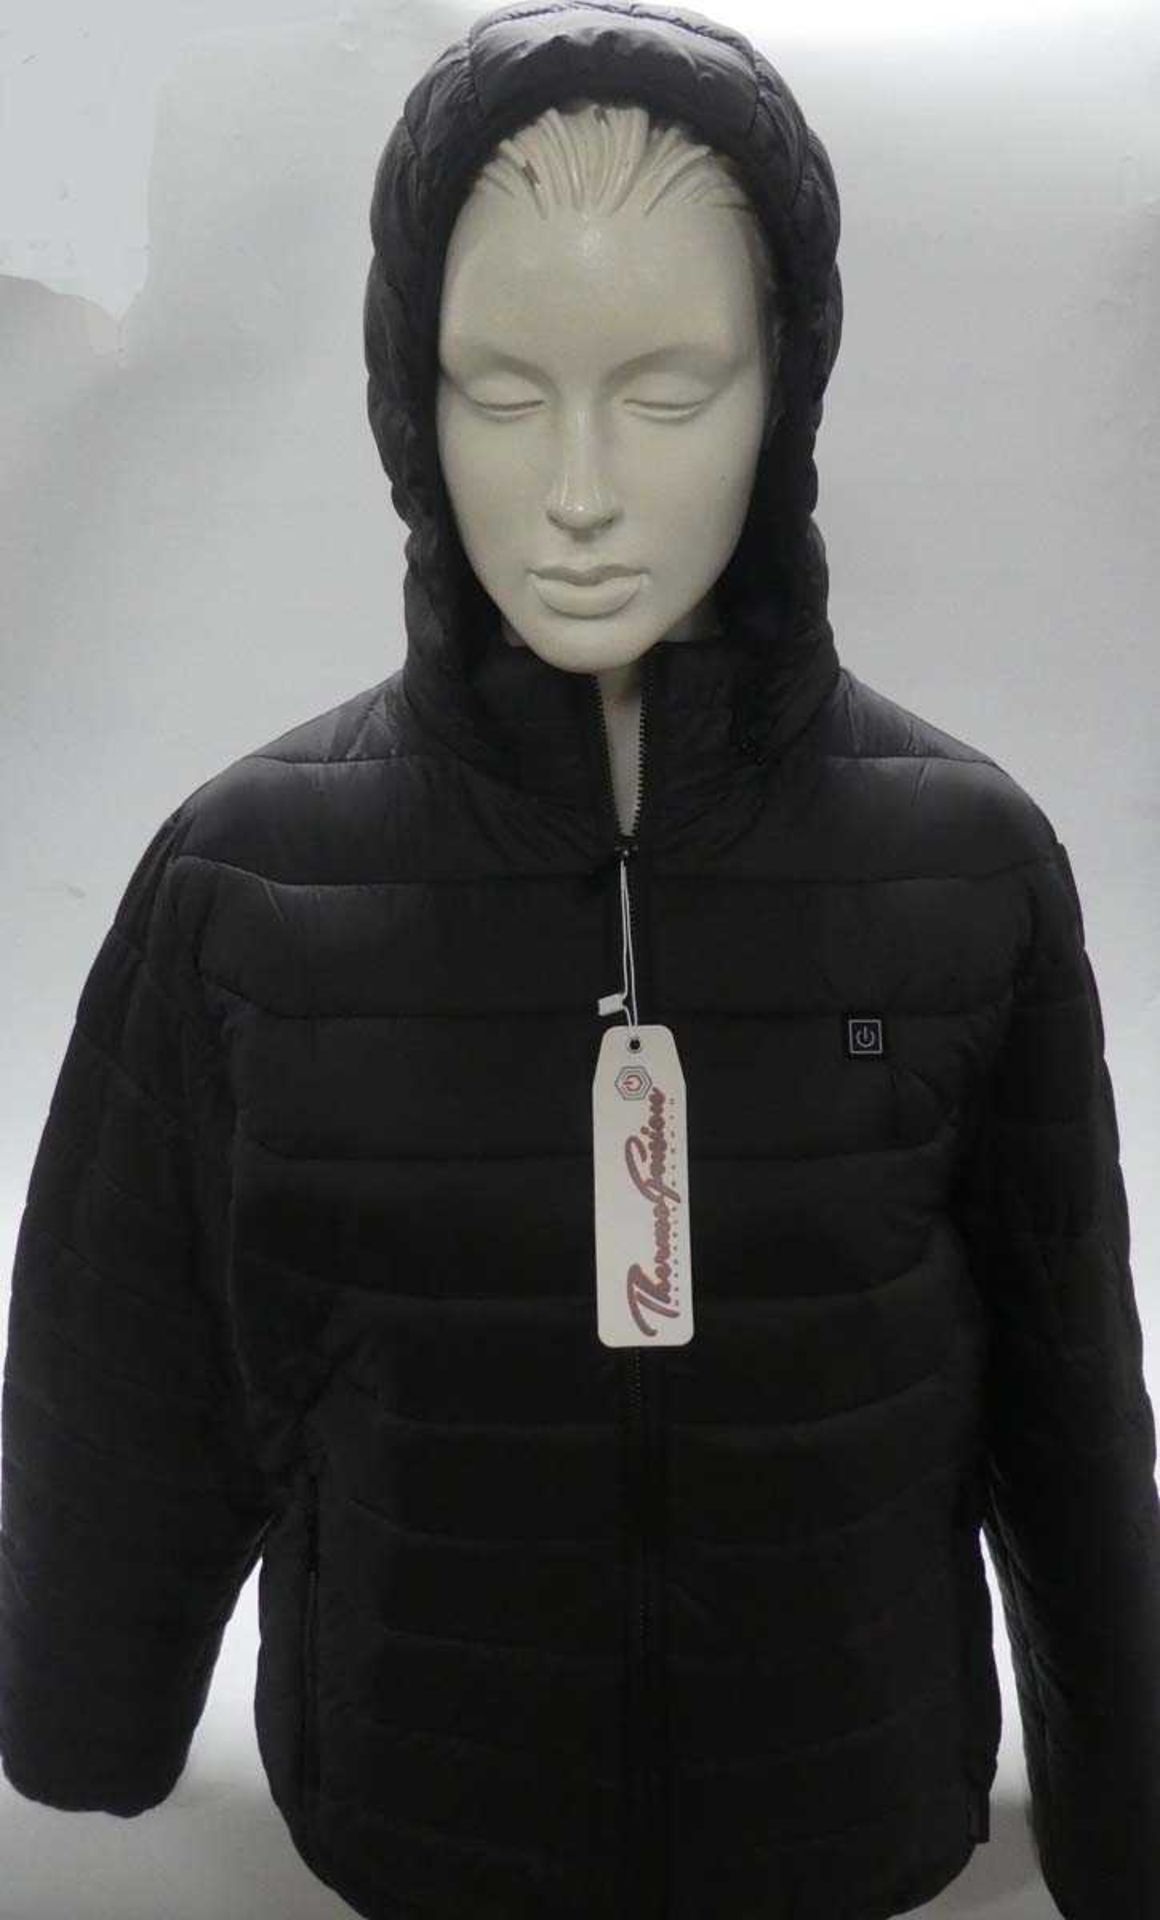 +VAT Thermofusion heated jacket with 5000mAh battery pack size medium